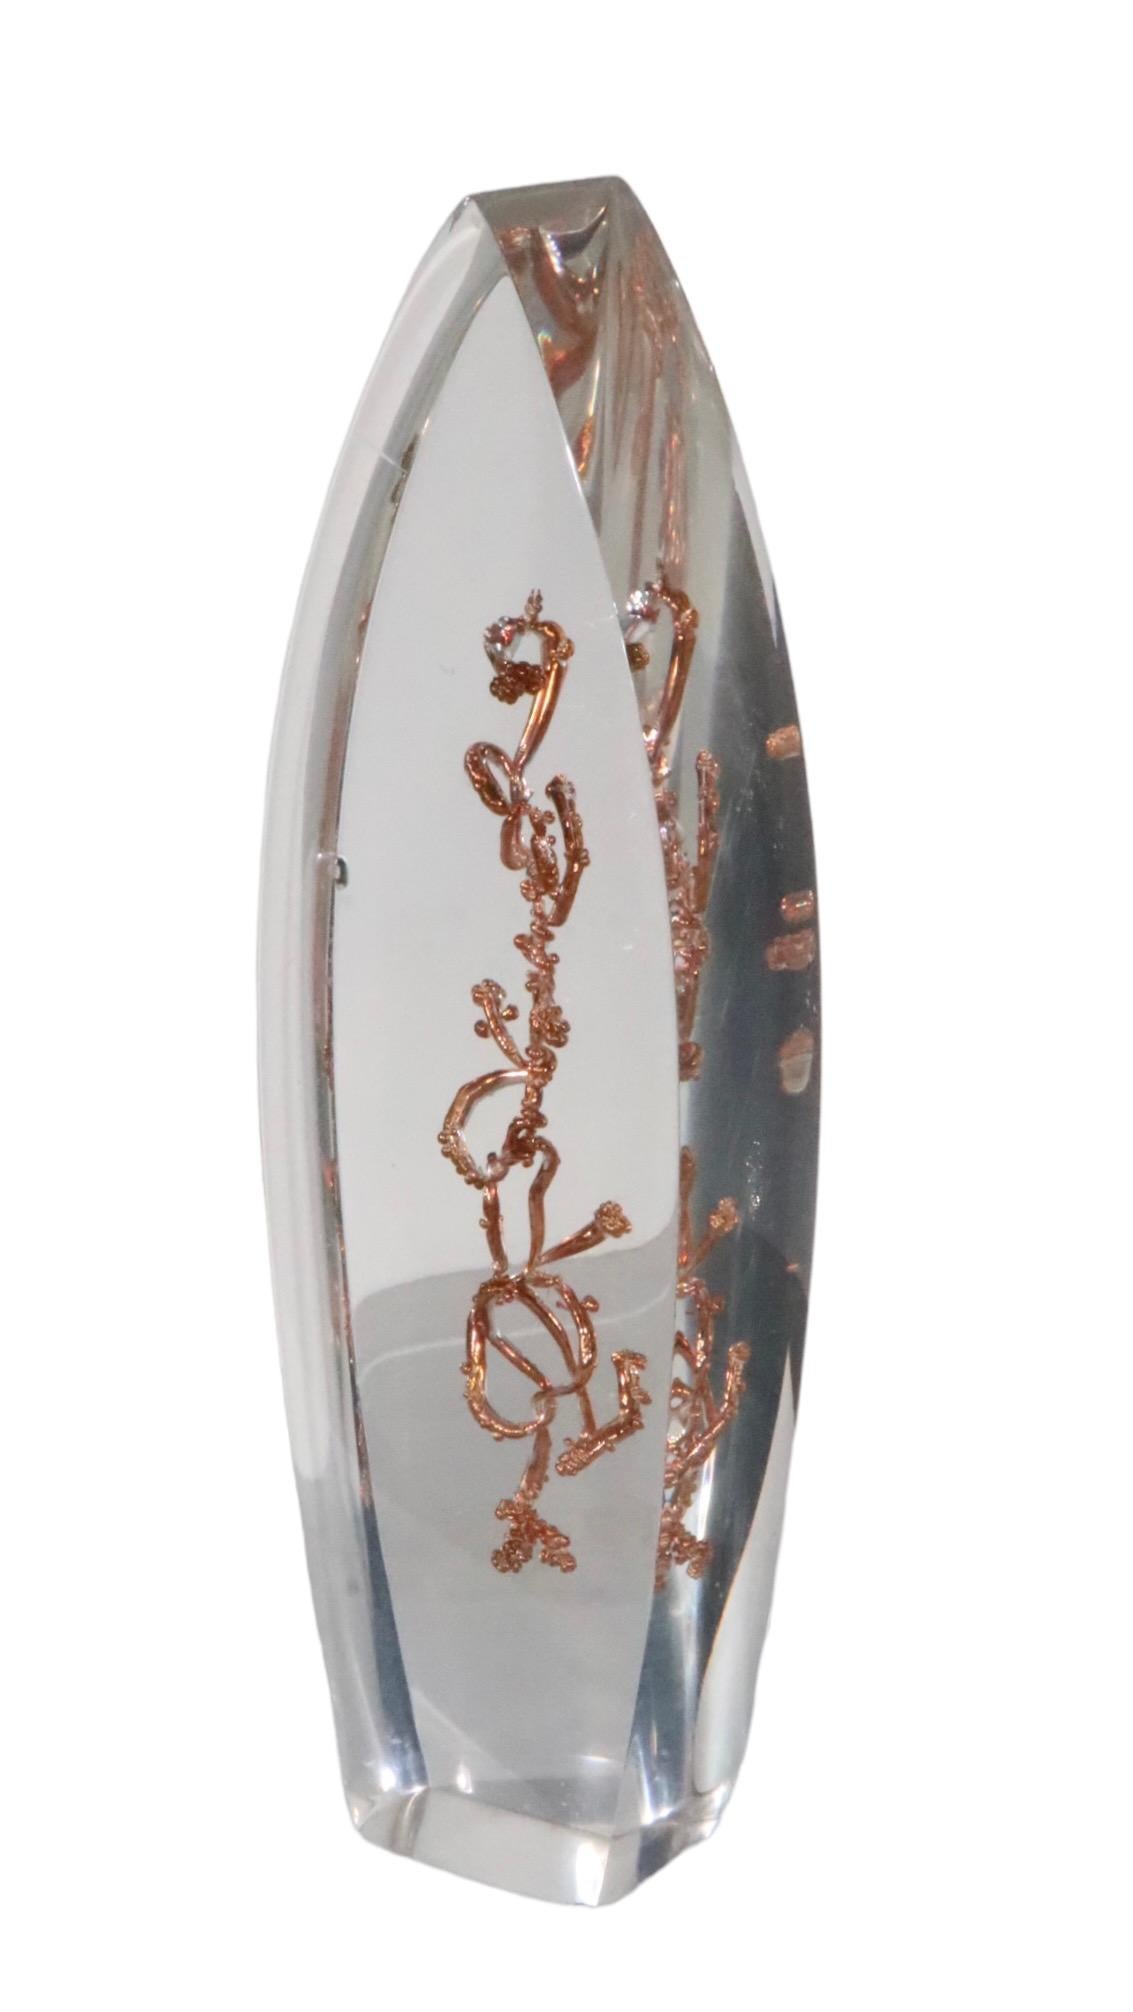 Cast Lucite with Internal Bronze Colored Form c 1970/1980's 1